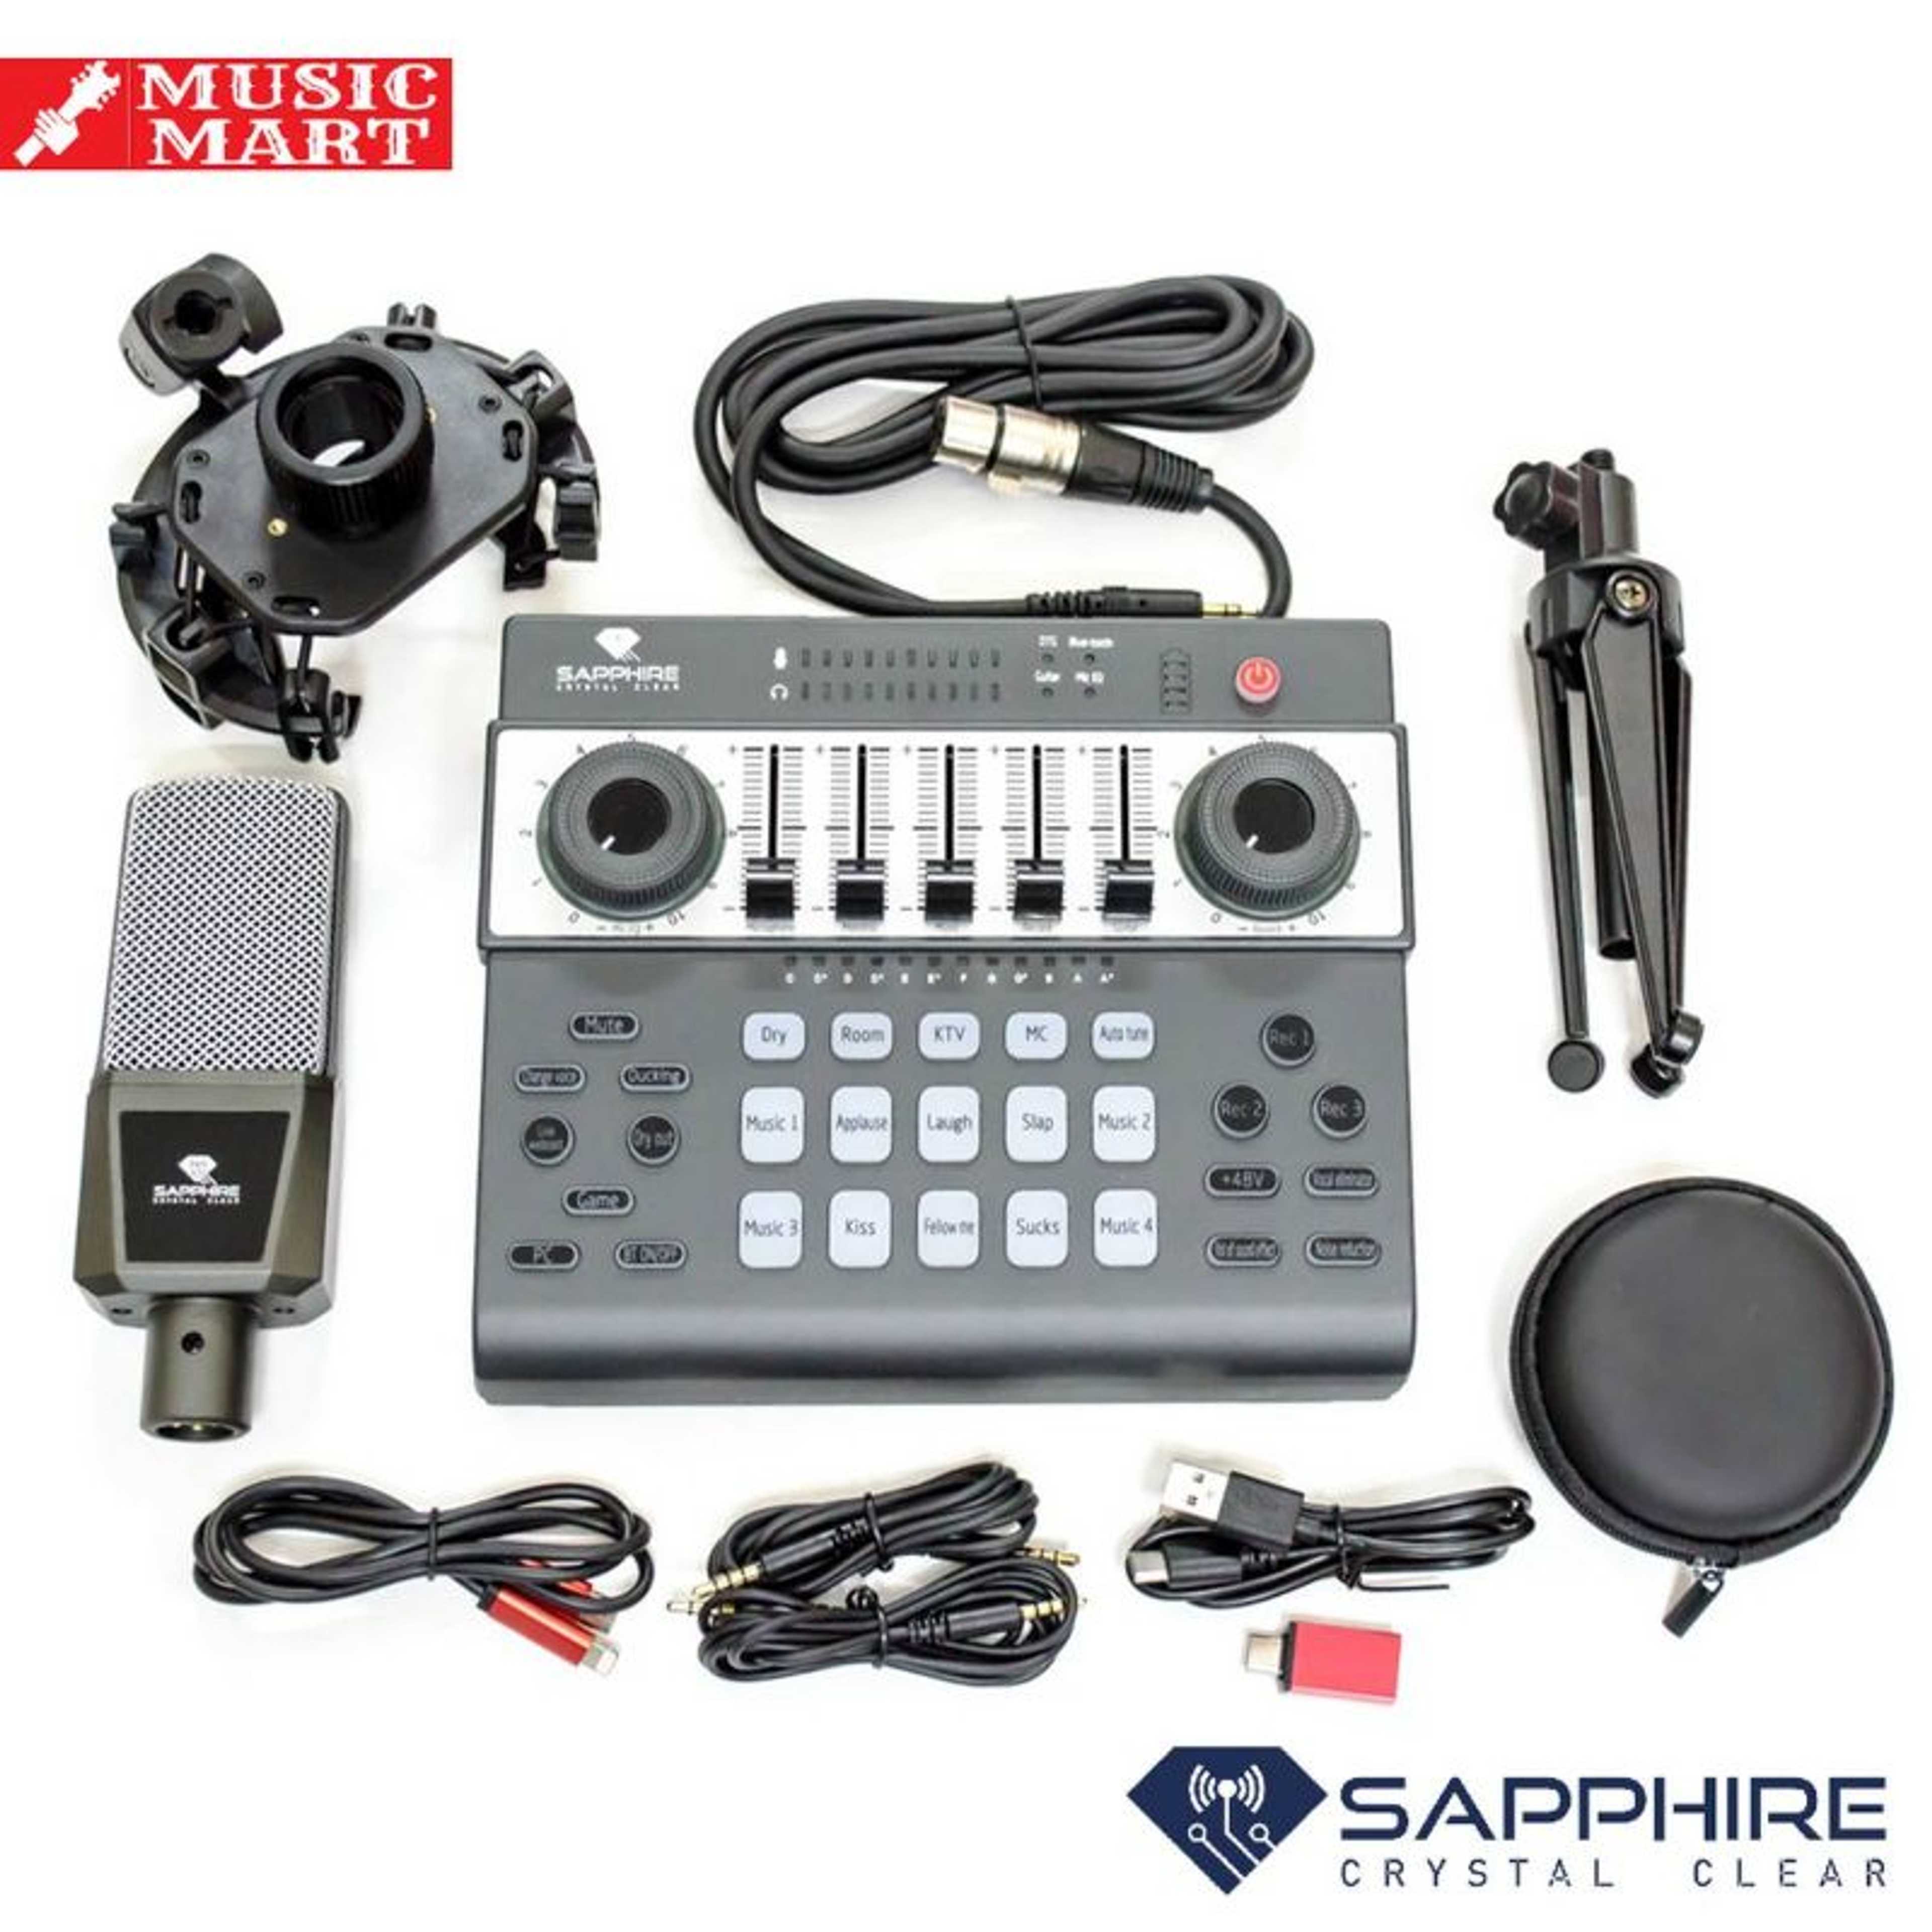 ALL IN ONE ULTIMATE VOCAL RECORDING STUDIO KIT - BEST FOR VOCAL RECORDING -  A UK LIMITED BRAND - BEST FOR SINGING, PODCASTING, STREAMING AND ANY TYPE OF RECORDING - EASY TO CONNECT WITH IOS, ANDROID AND PC -  CRYSTAL CLEAR VOICE